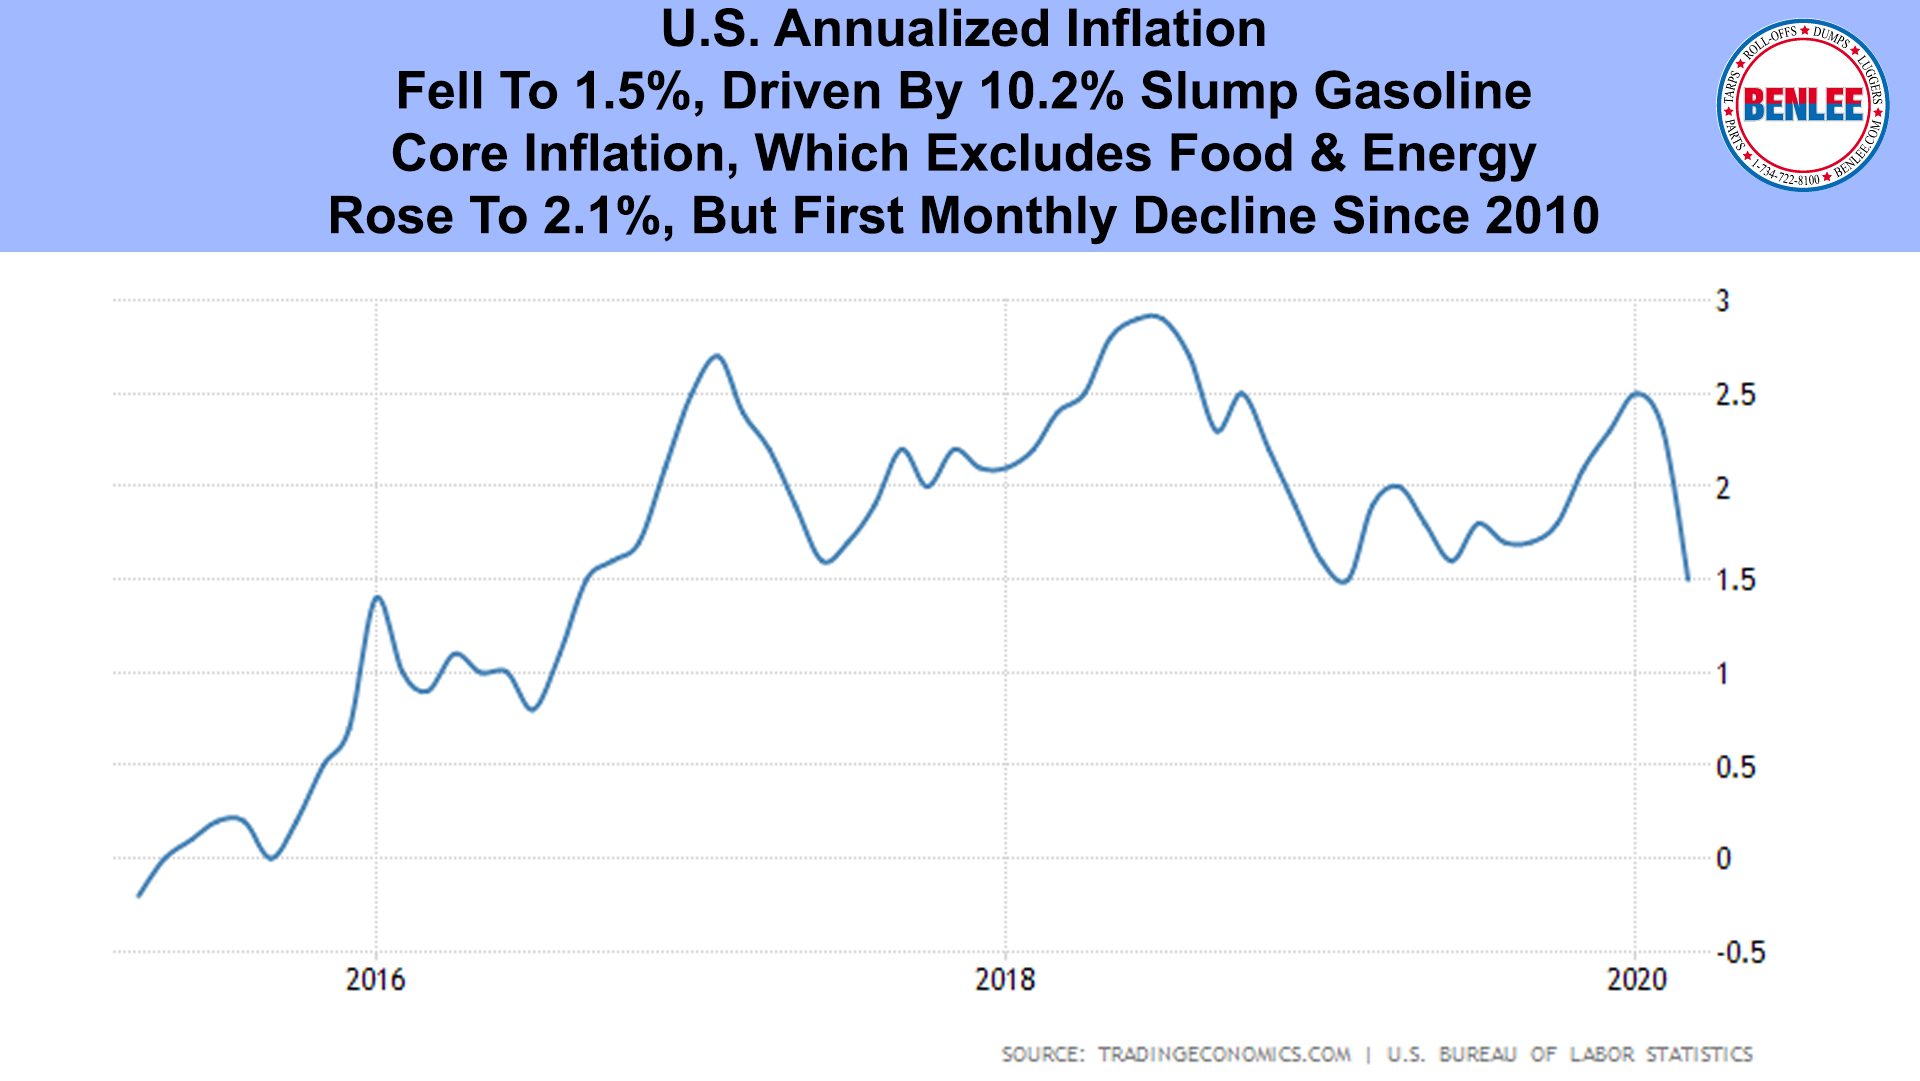 U.S. Annualized Inflation